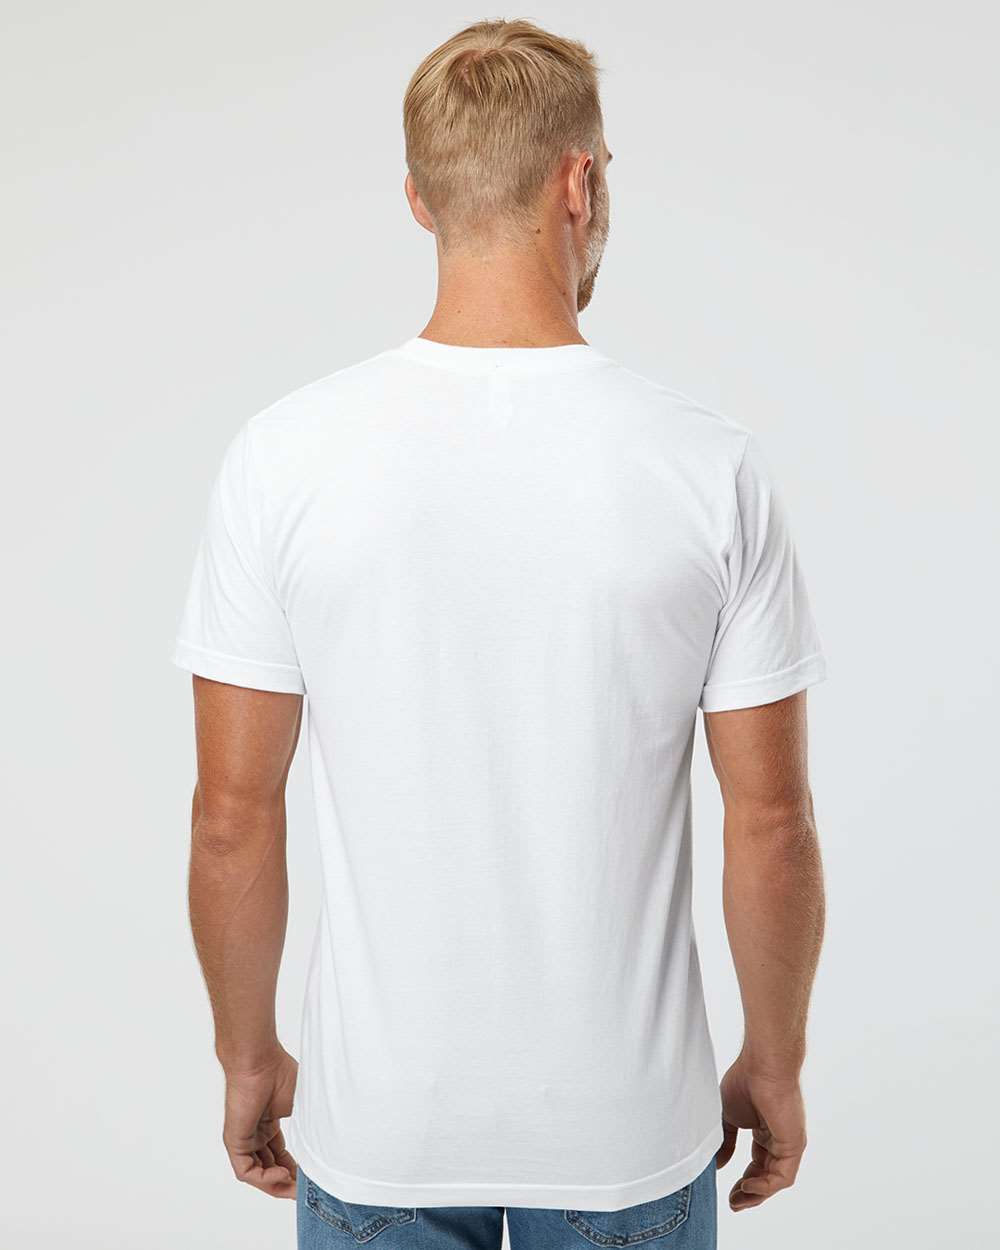 American Apparel Fine Jersey Tee 2001 #colormdl_White